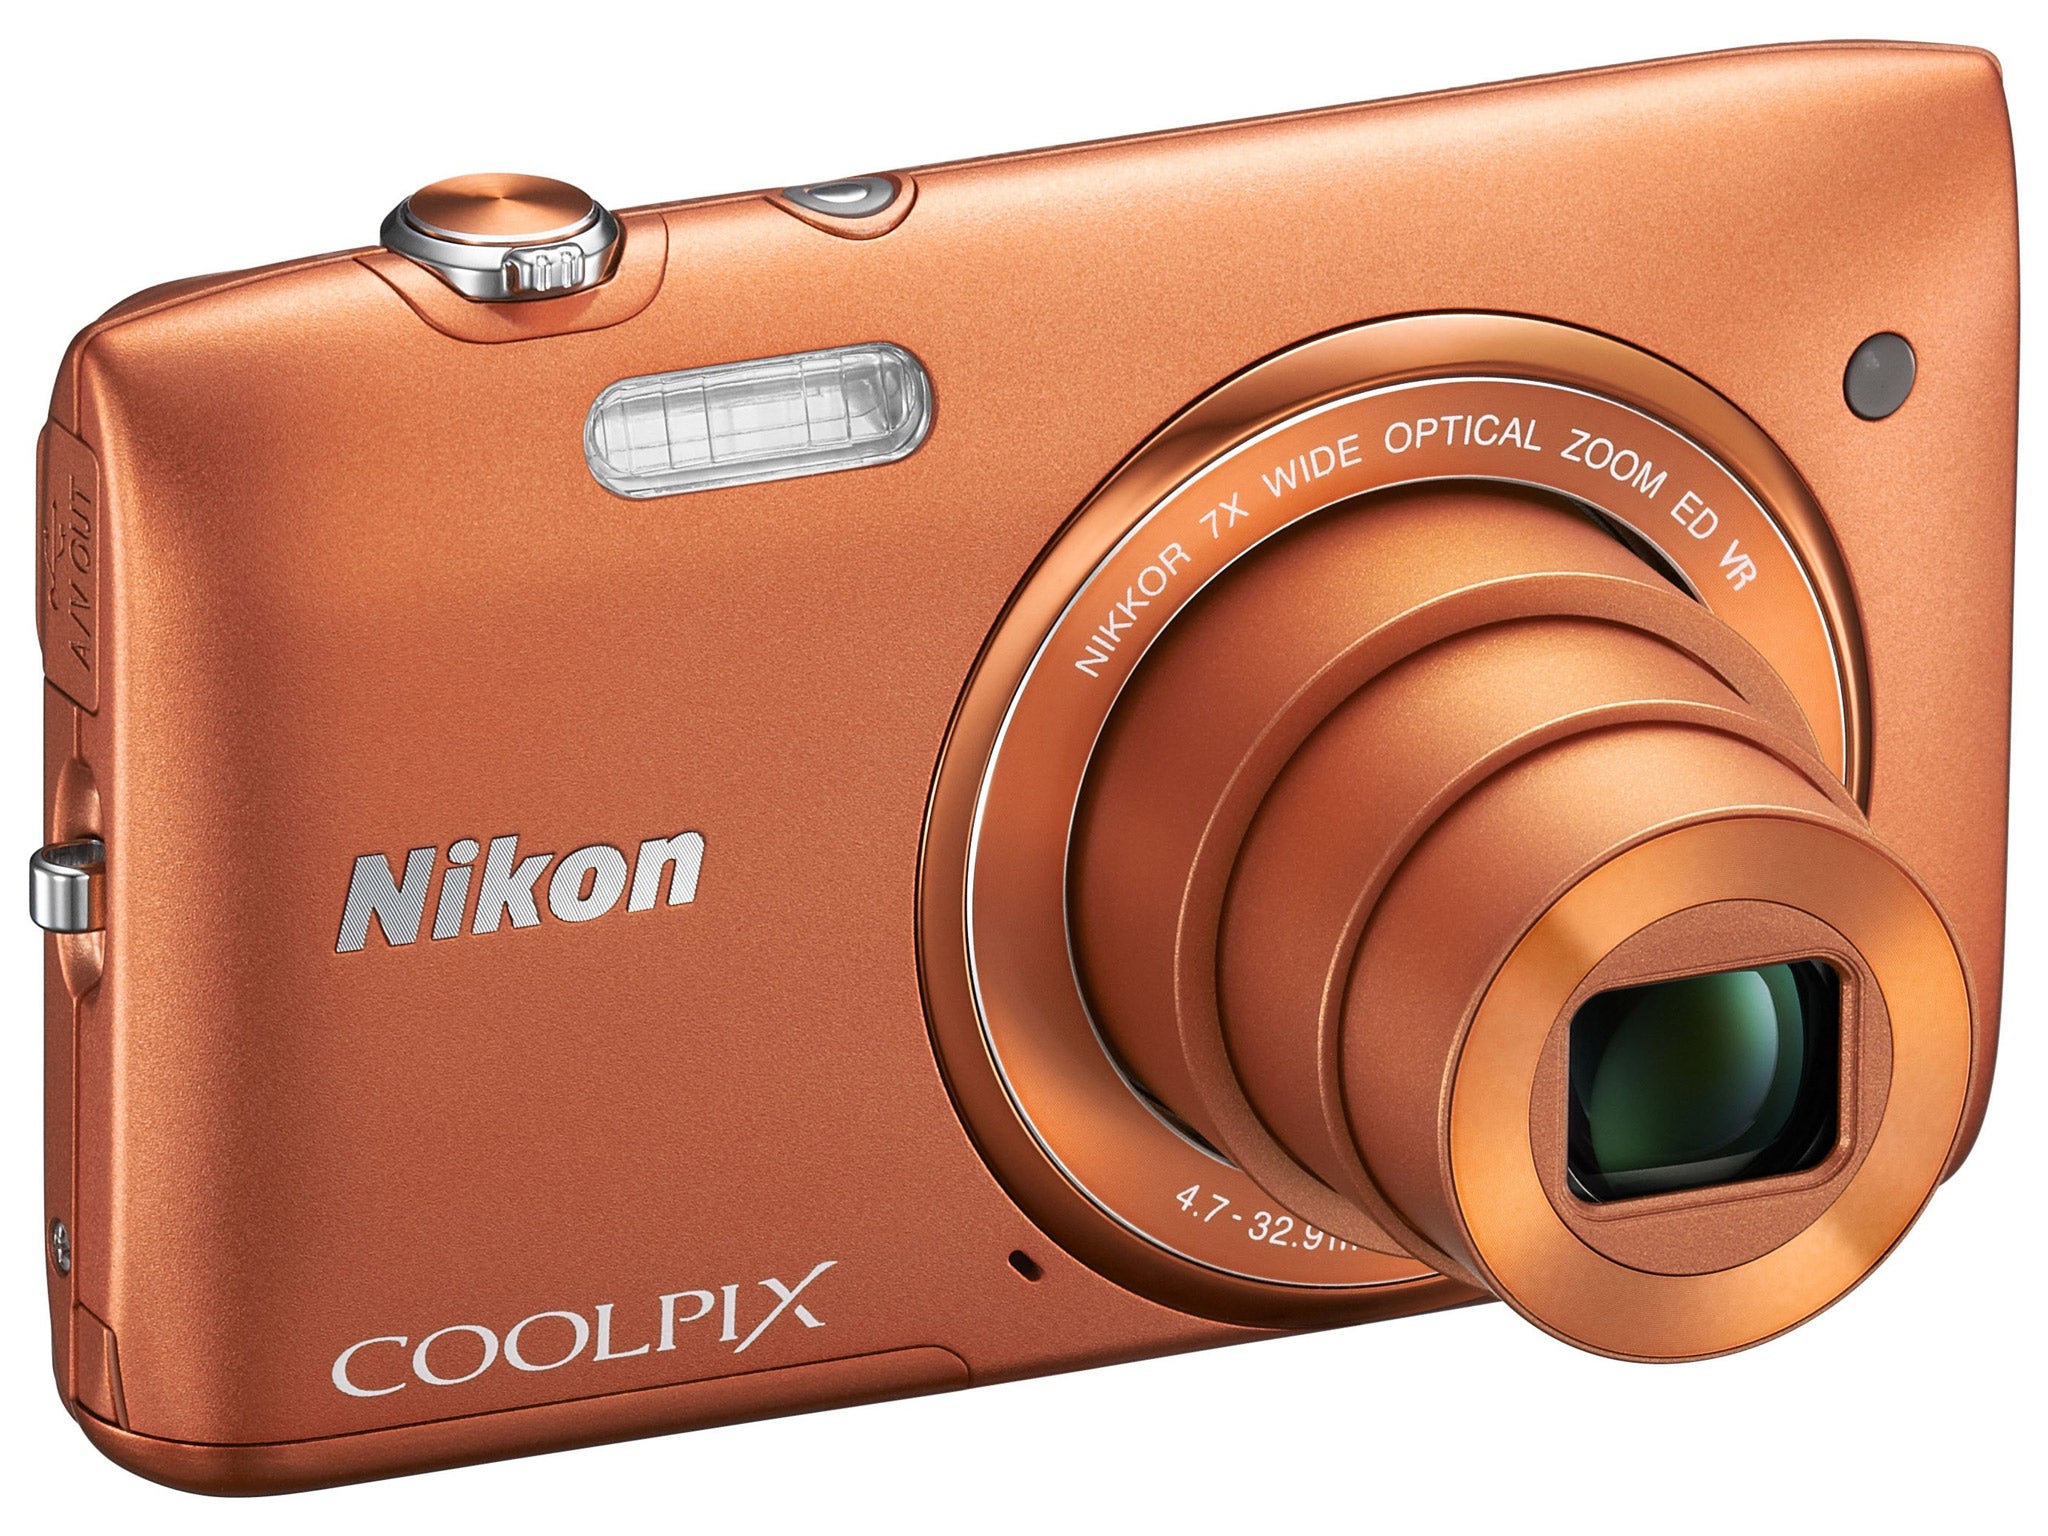 Ideal for holidays: the Coolpix S3500